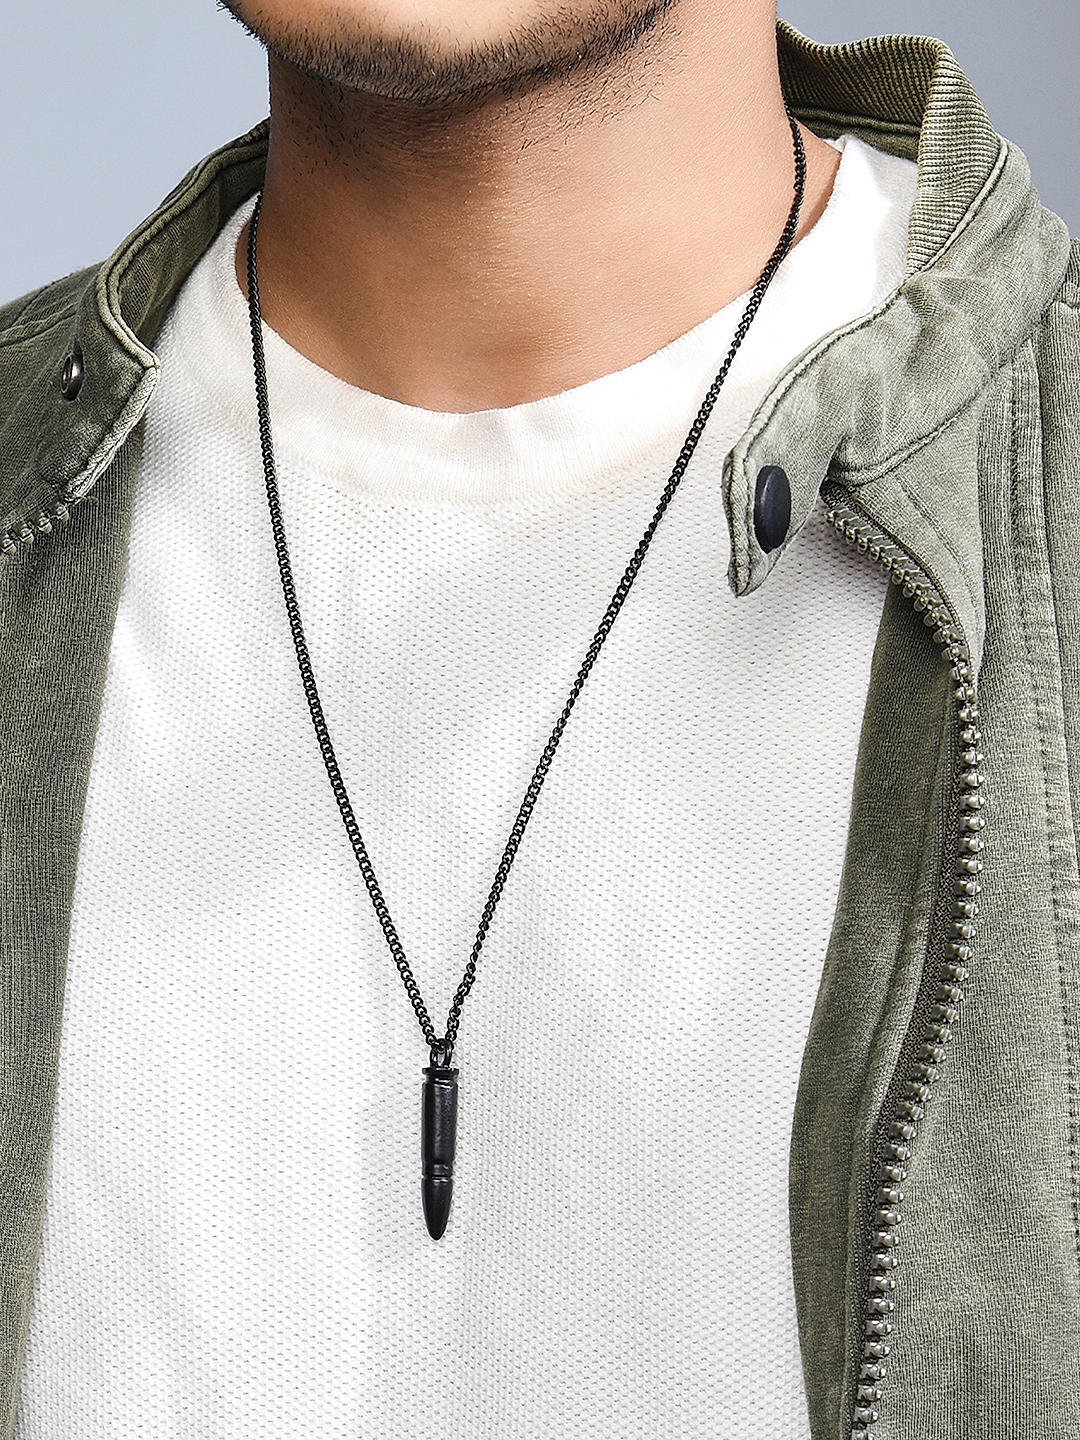 Long Black Beaded Necklace With Arrowhead Pendant | Classy Men Collection